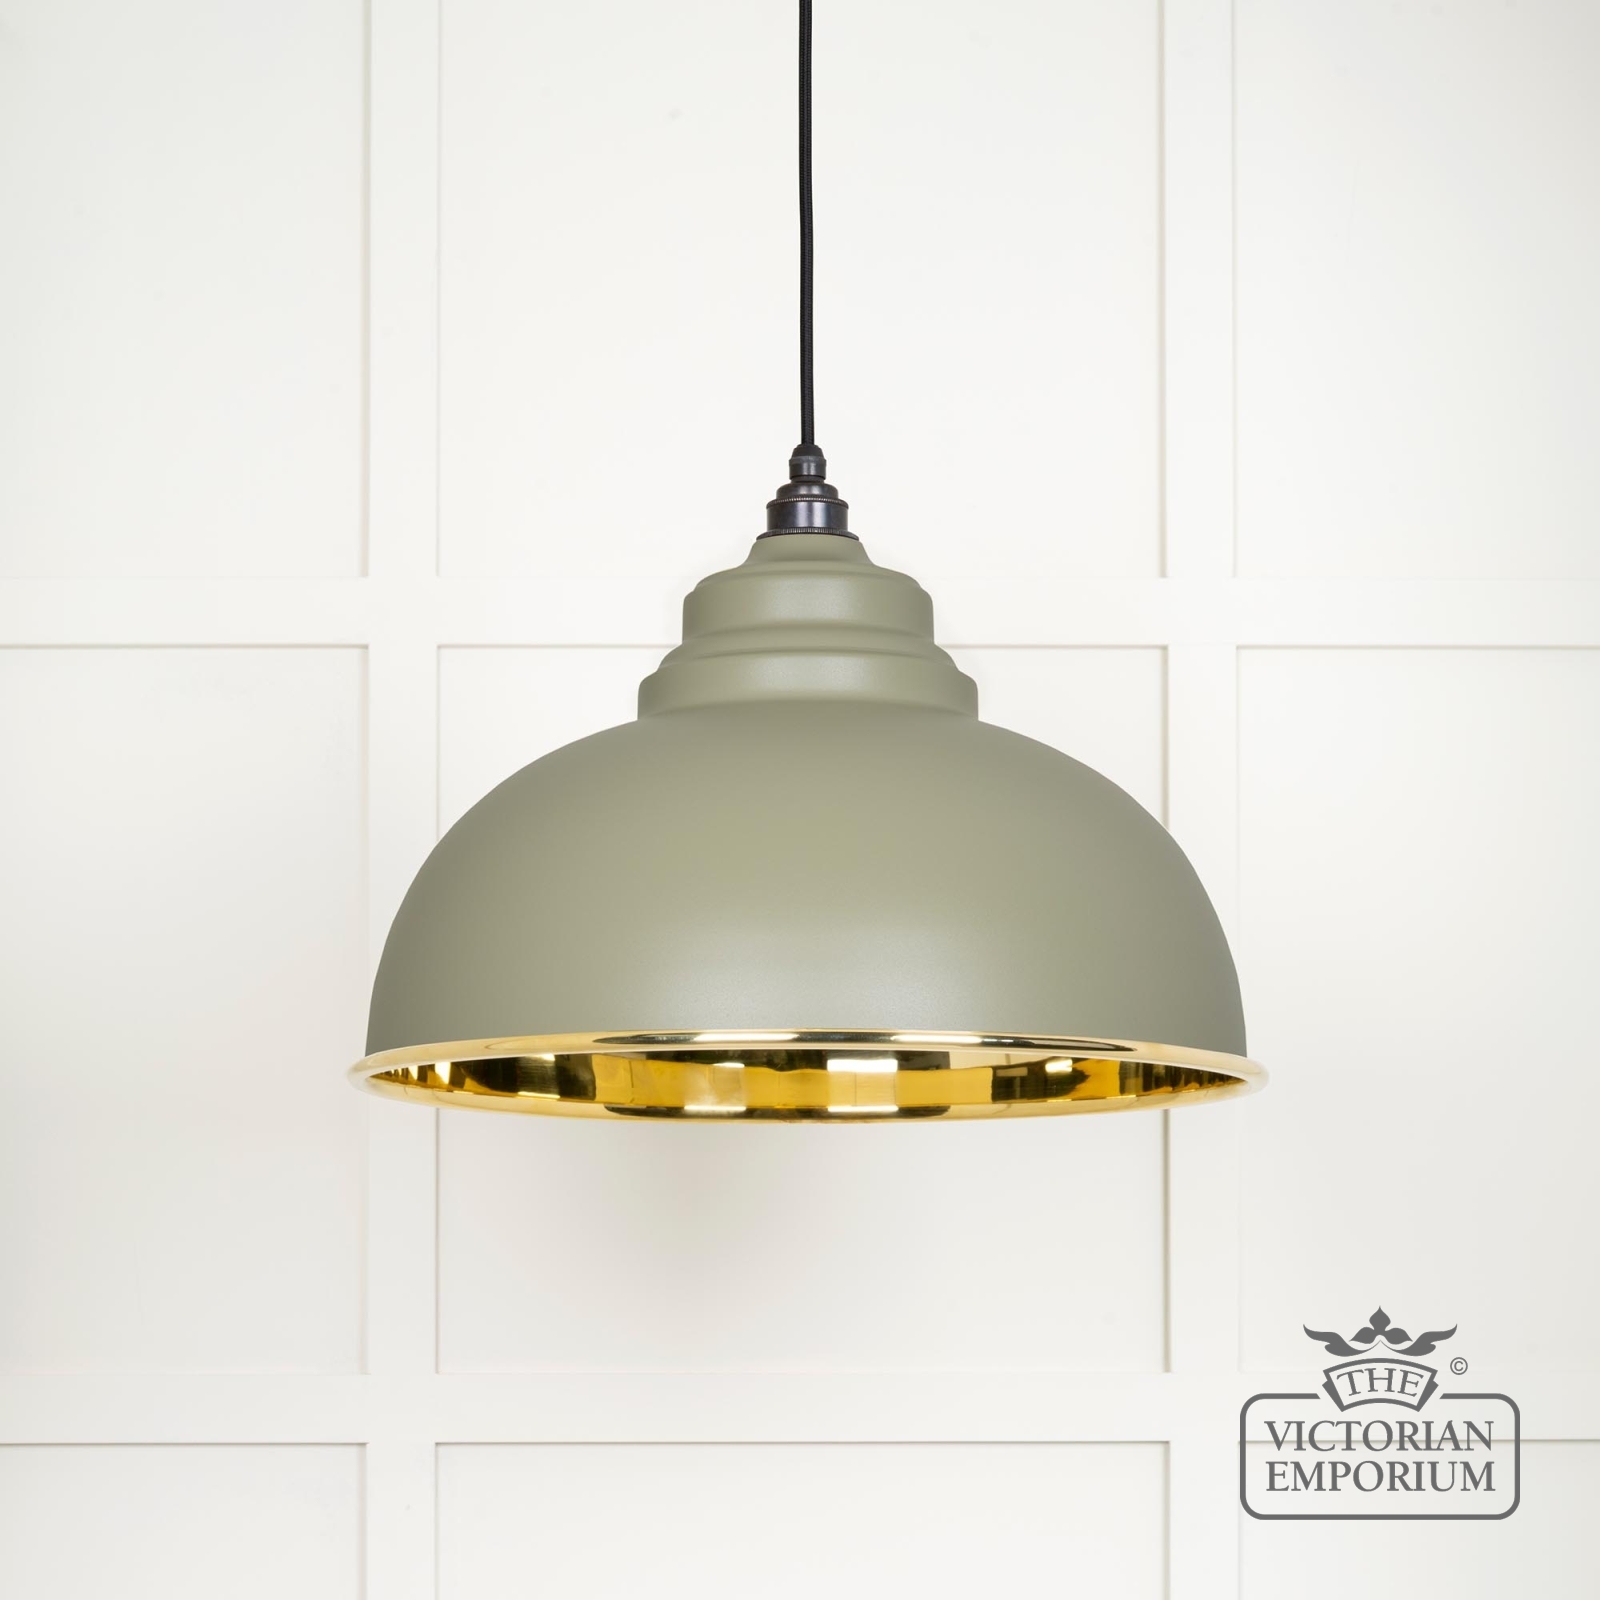 Harlow pendant light in smooth brass with painted Tump exterior